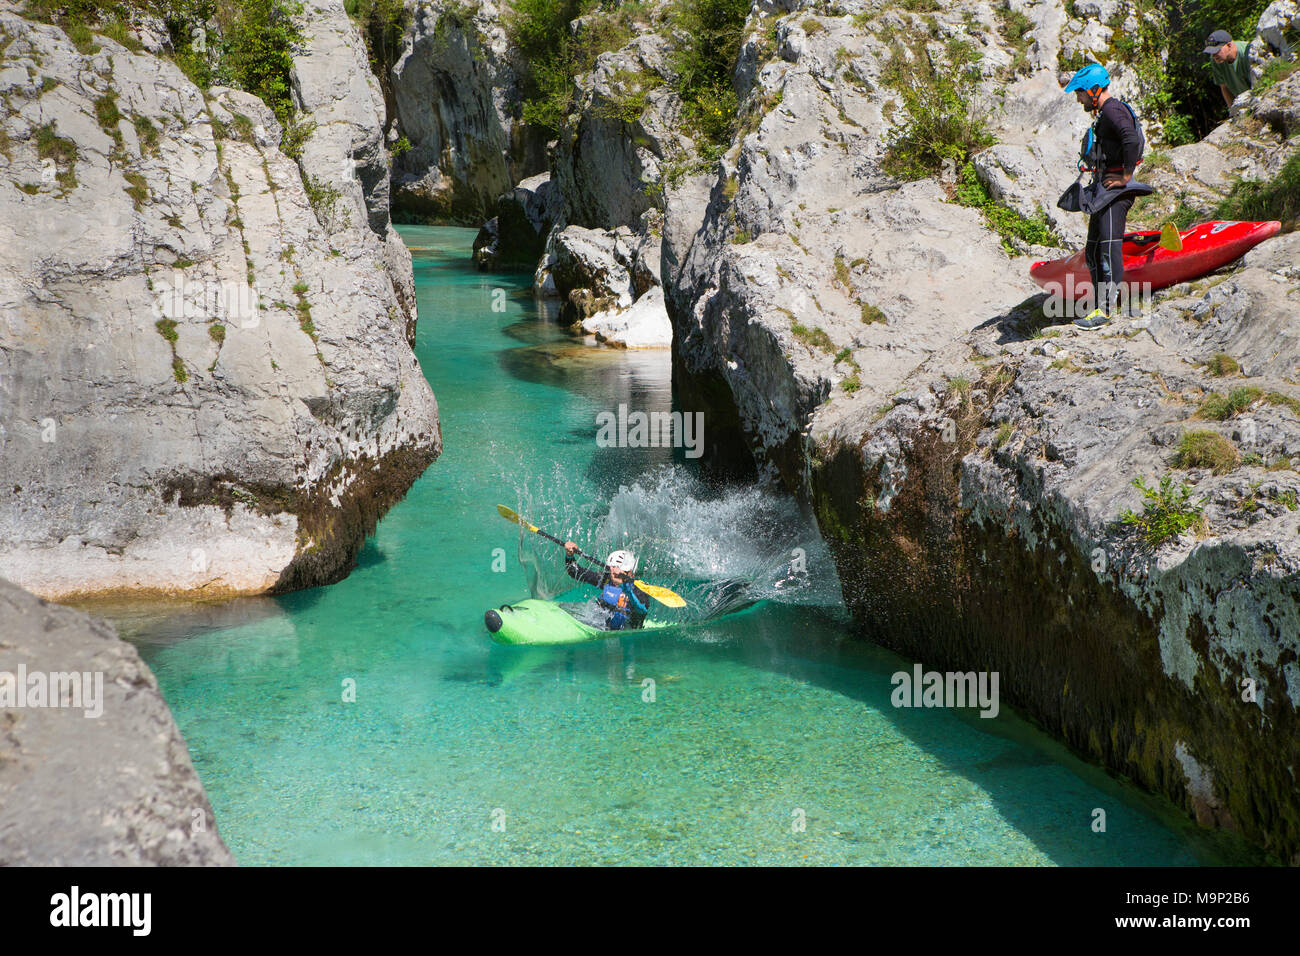 A man in a kayak is jumping into the water, while another man is watching. The emerald Soca near Bovec in Slovenia, originating in the Triglav mountains, is famous for all kinds of white water activities. Stock Photo